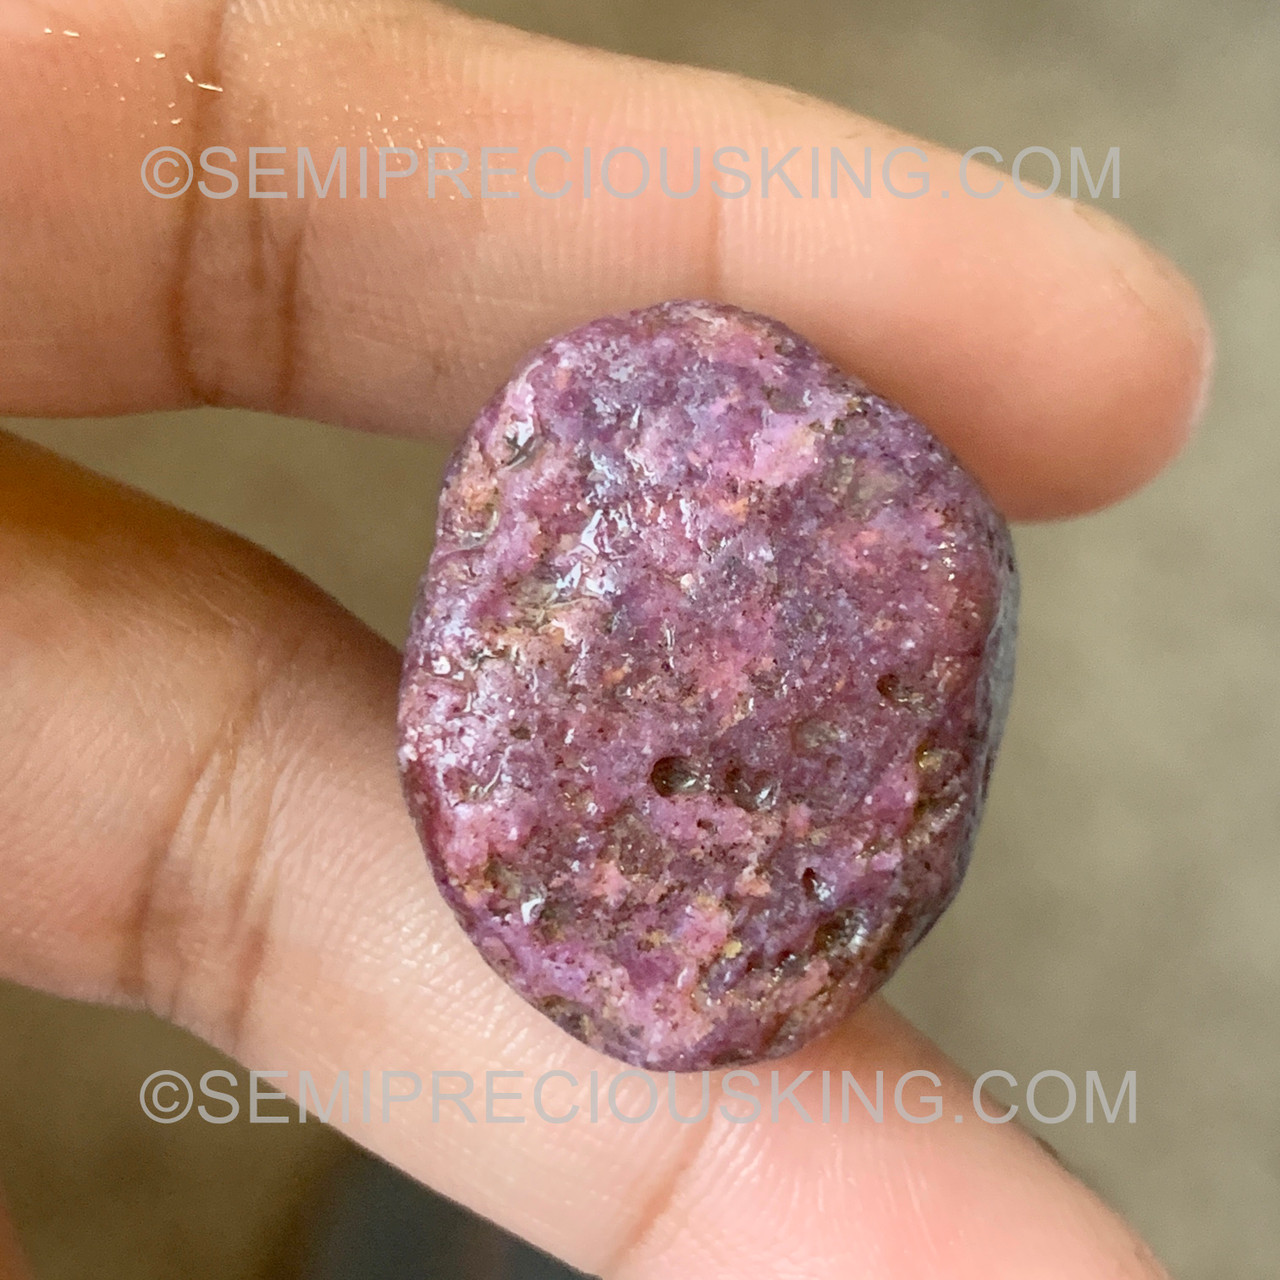 Details about   100 % Natural Earth Minded Untreated Burma Ruby Rough Loose Gemstone Lot